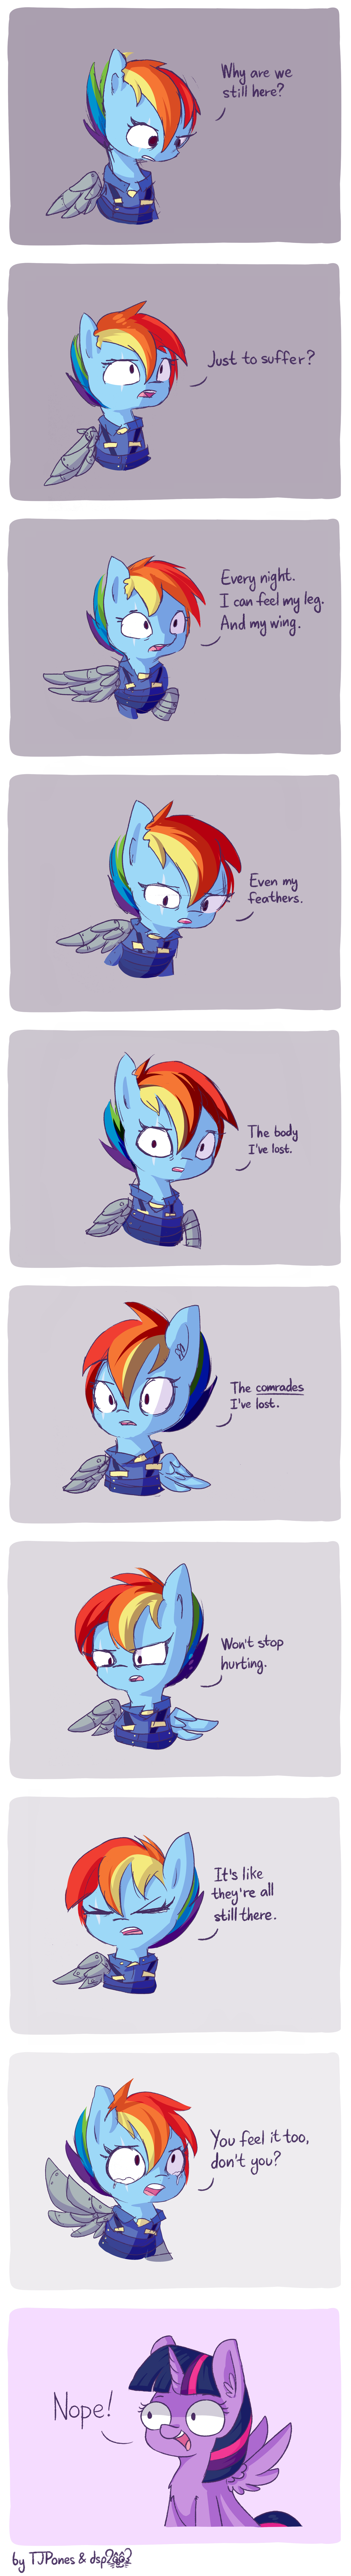 Sparkles! The Wonder Horse! Issue #8 [Collab] by dsp2003